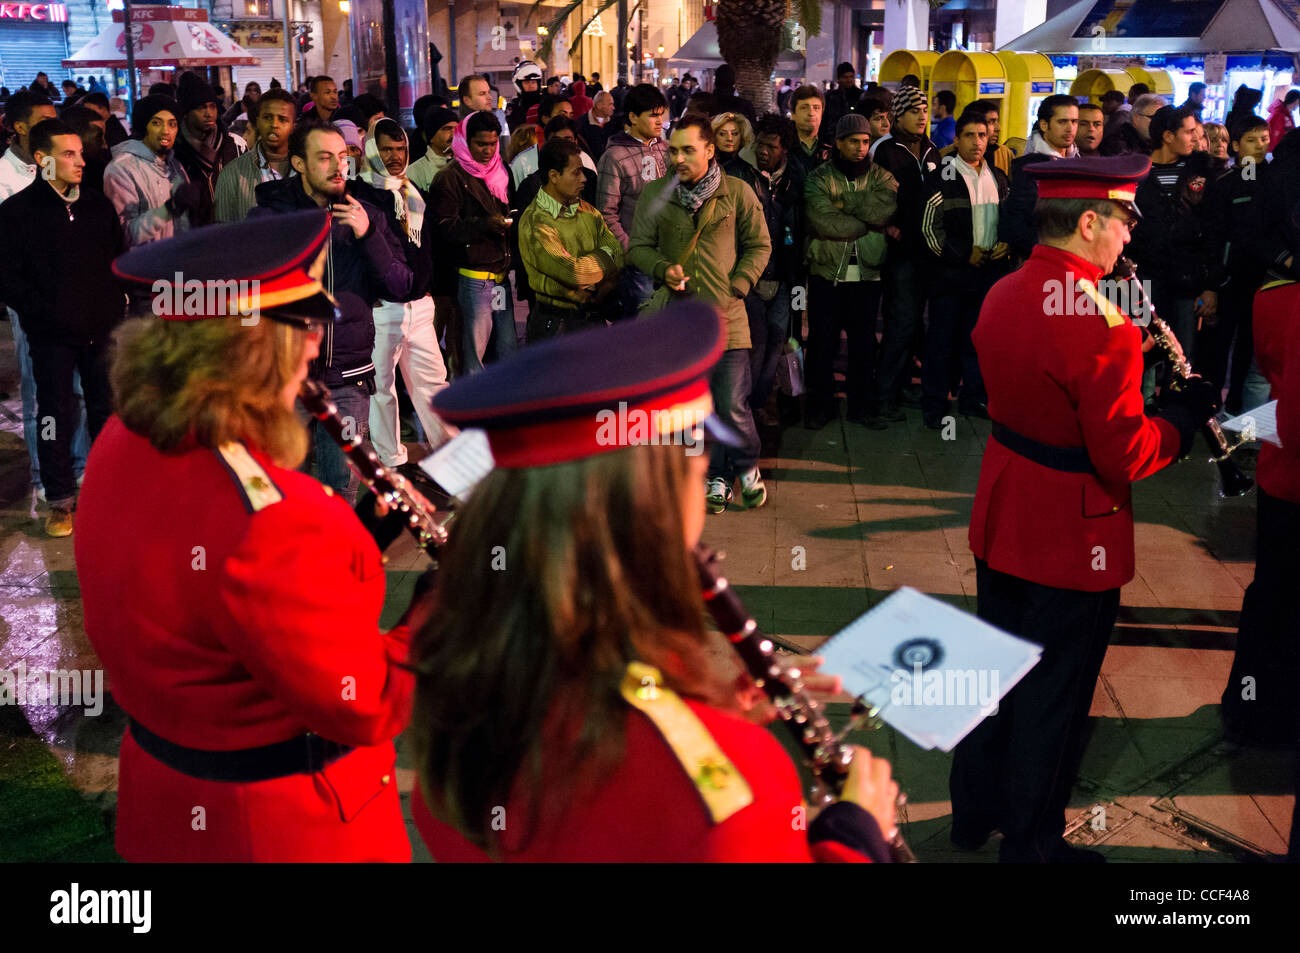 Brass band on New Years Eve, Omonia Square, Athens, Greece, Europe Stock Photo